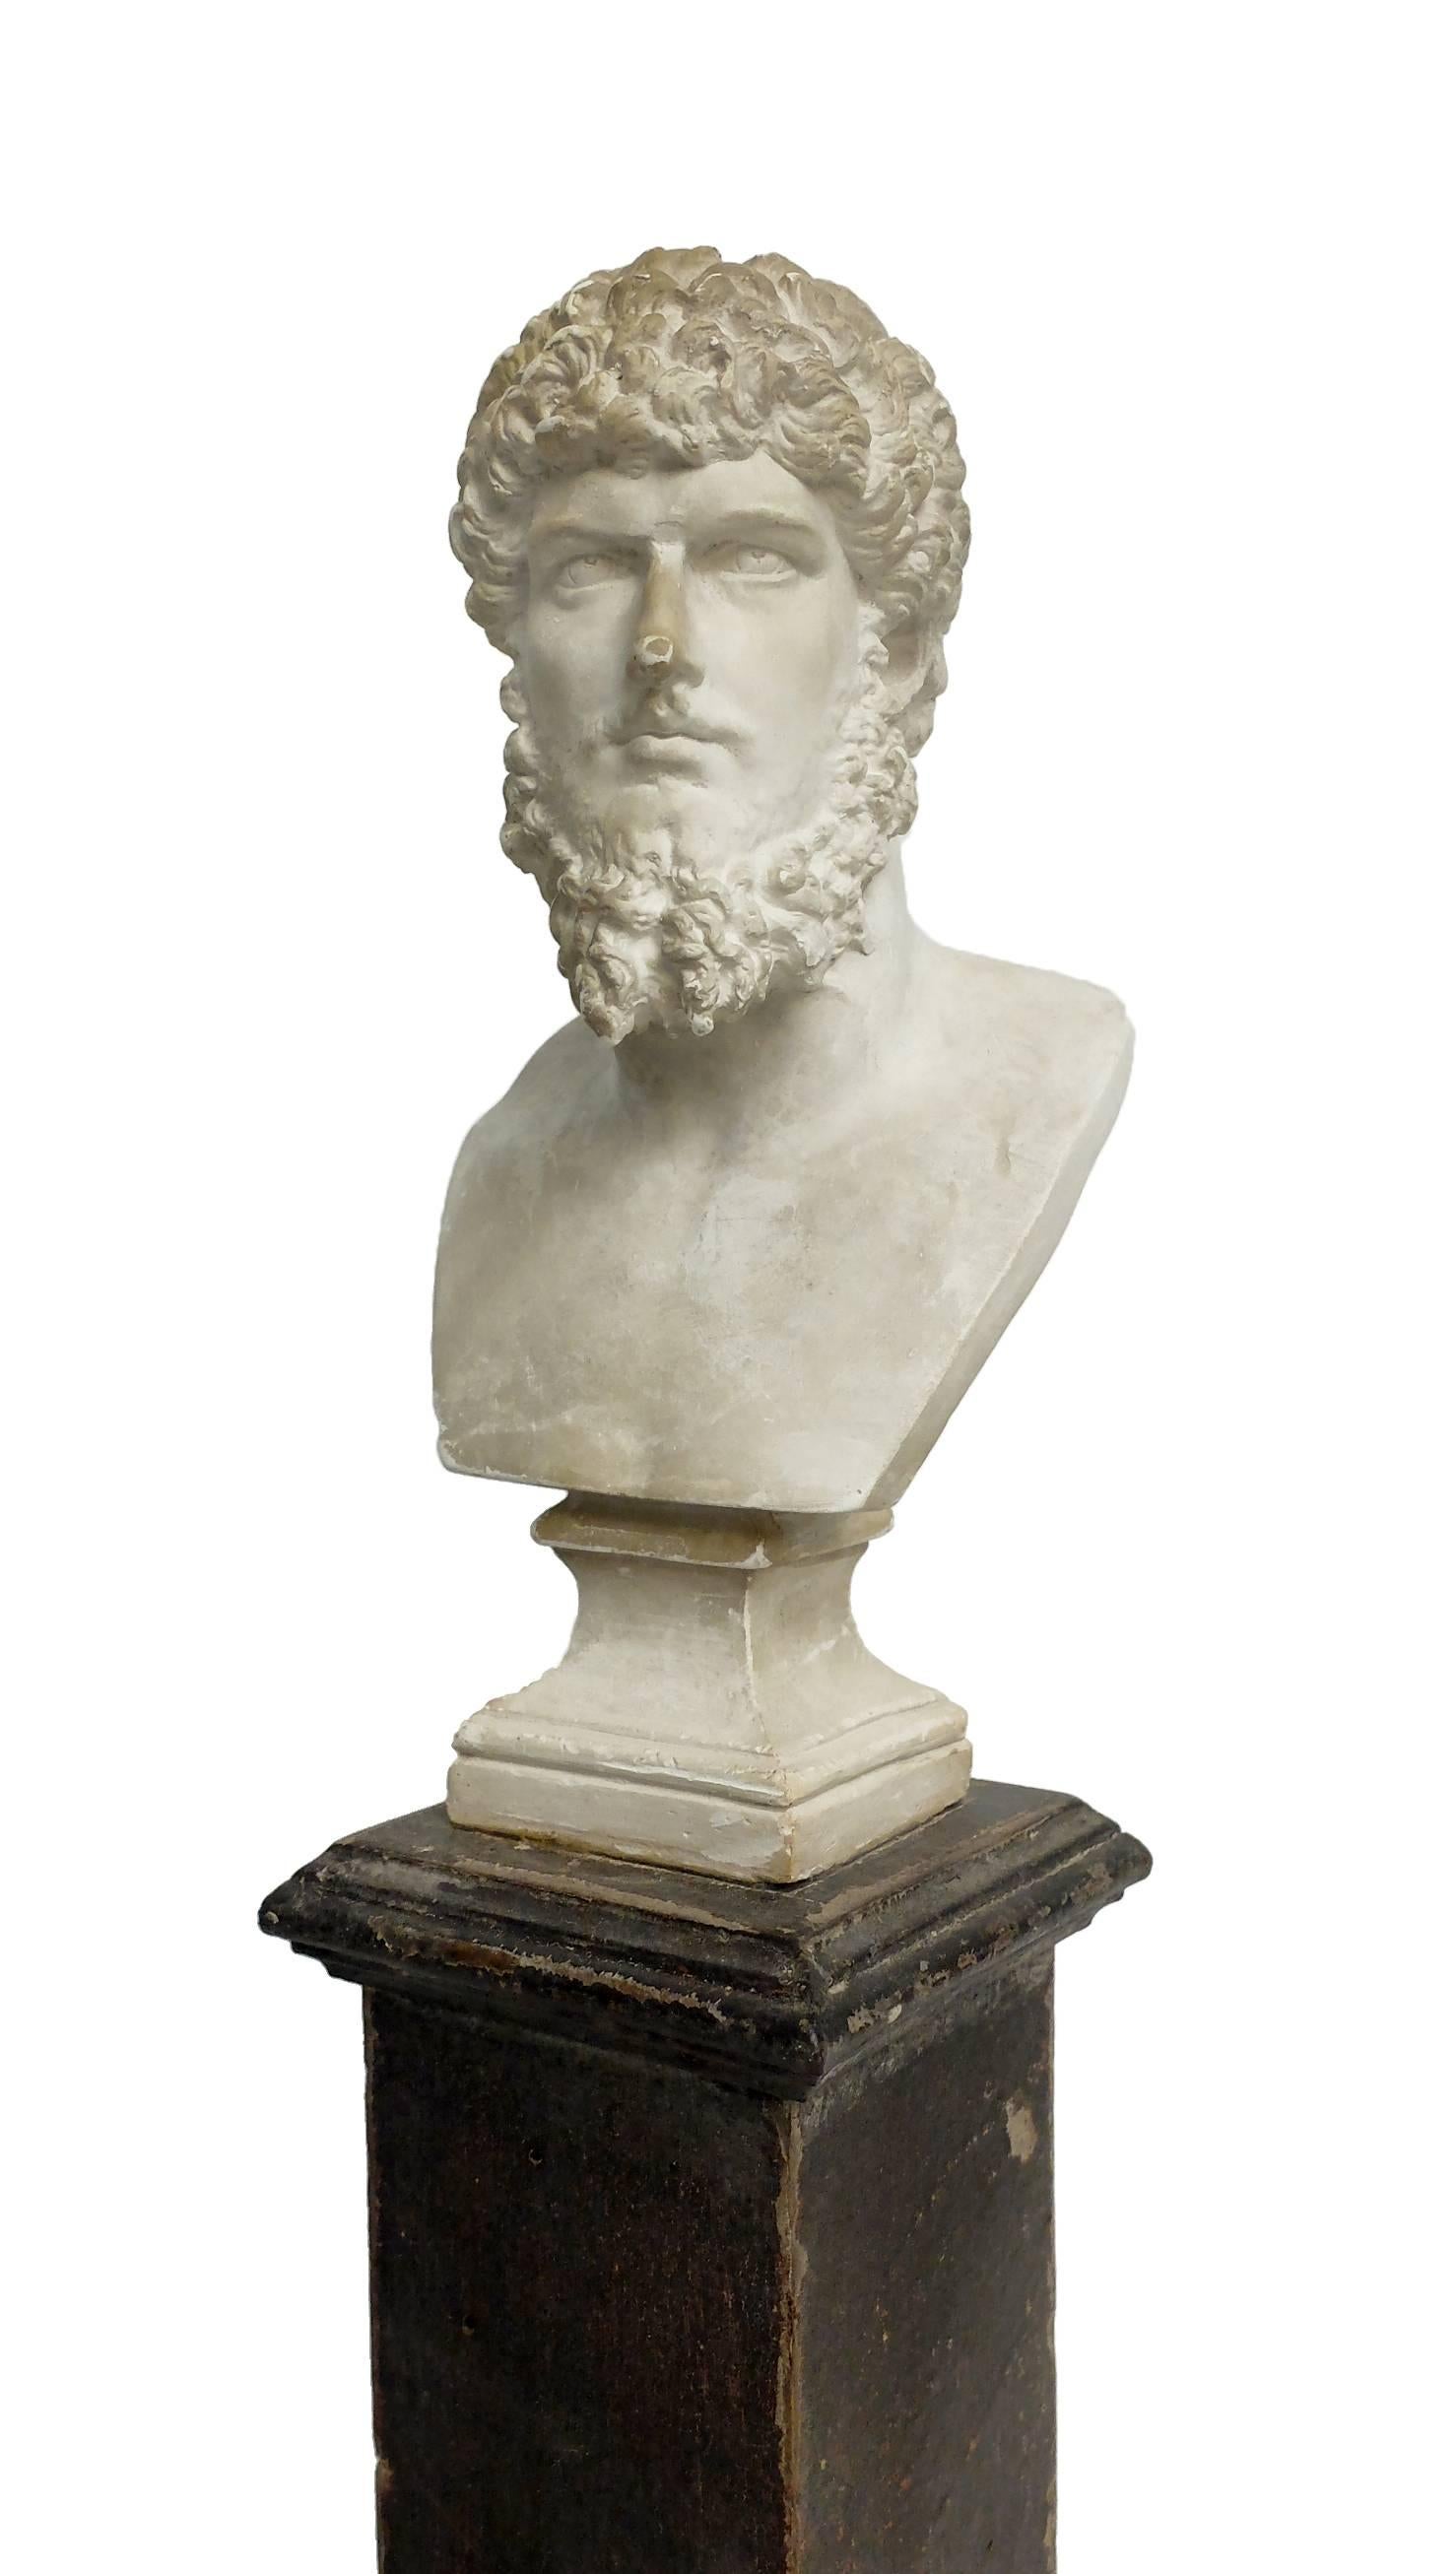 Late 19th Century Pair of Academic Cast of Plaster Busts Depicting Lucius Verus and Alexander